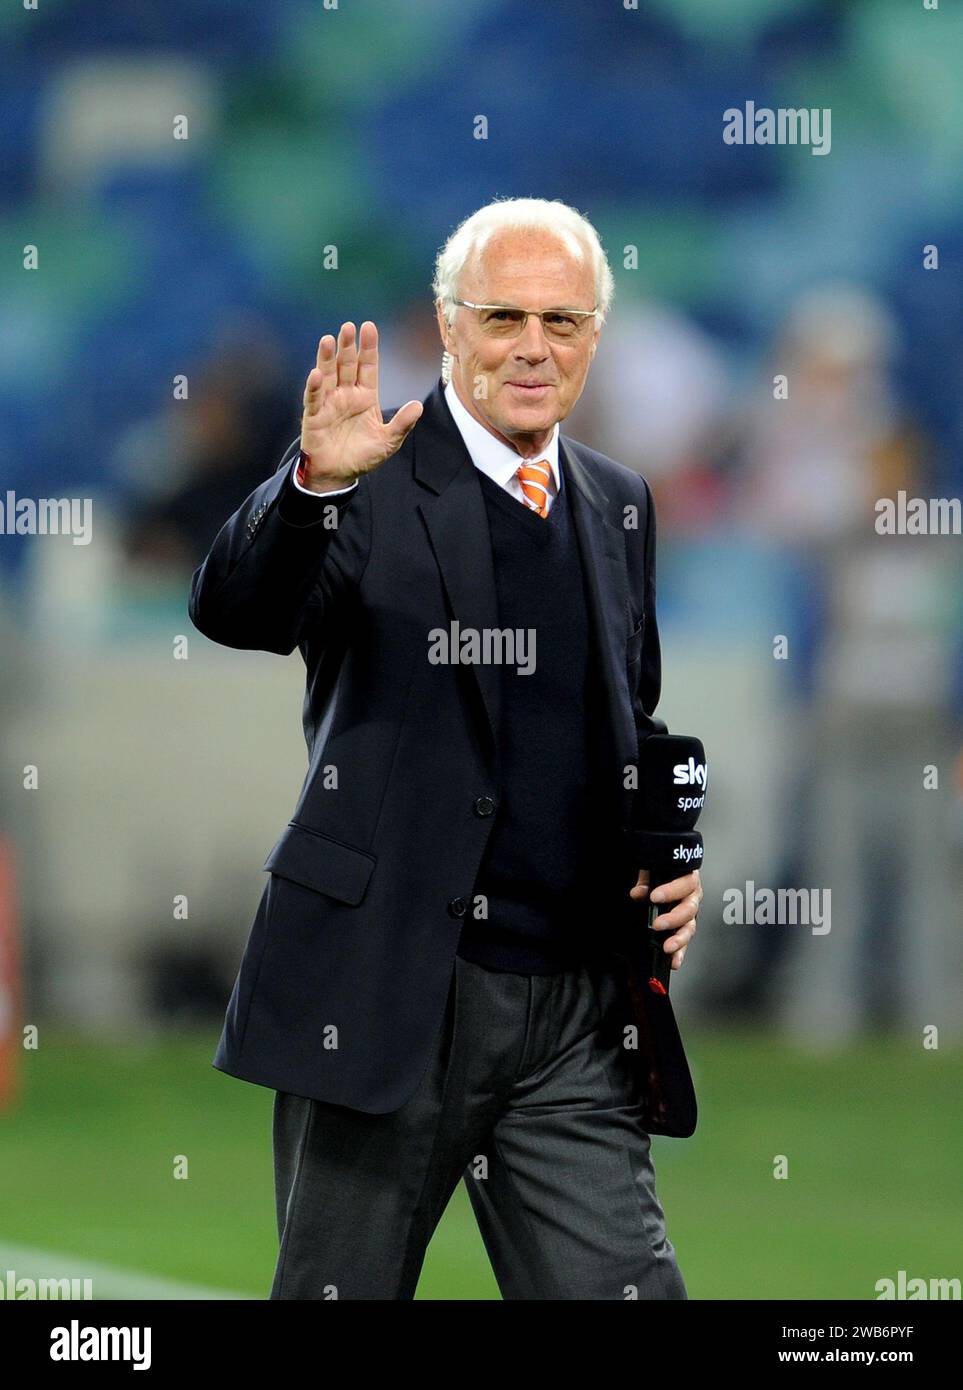 Beijing, China. 7th July, 2010. German football legend Franz Beckenbauer has died at 78, according to German Football Association (DFB) on Jan. 8, 2024. This file photo taken on July 7, 2010 shows Franz Beckenbauer waving to the media before the 2010 FIFA football World Cup semifinal between Germany and Spain at Durban Stadium, in Durban, South Africa. Credit: Wang Yuguo/Xinhua/Alamy Live News Stock Photo